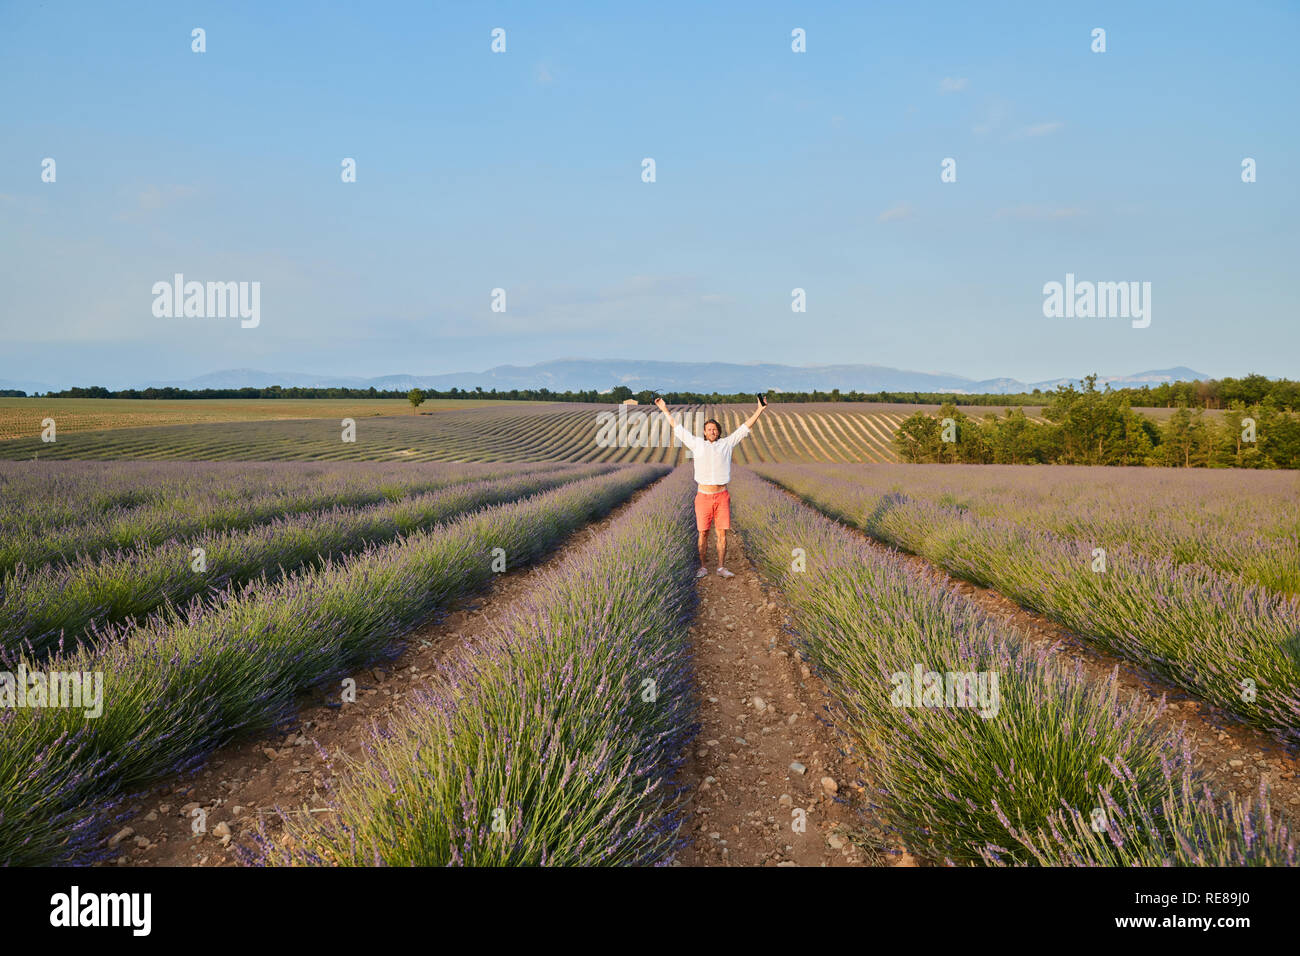 The beautiful brutal young man with long brunette hair poses in the field of lavender Stock Photo